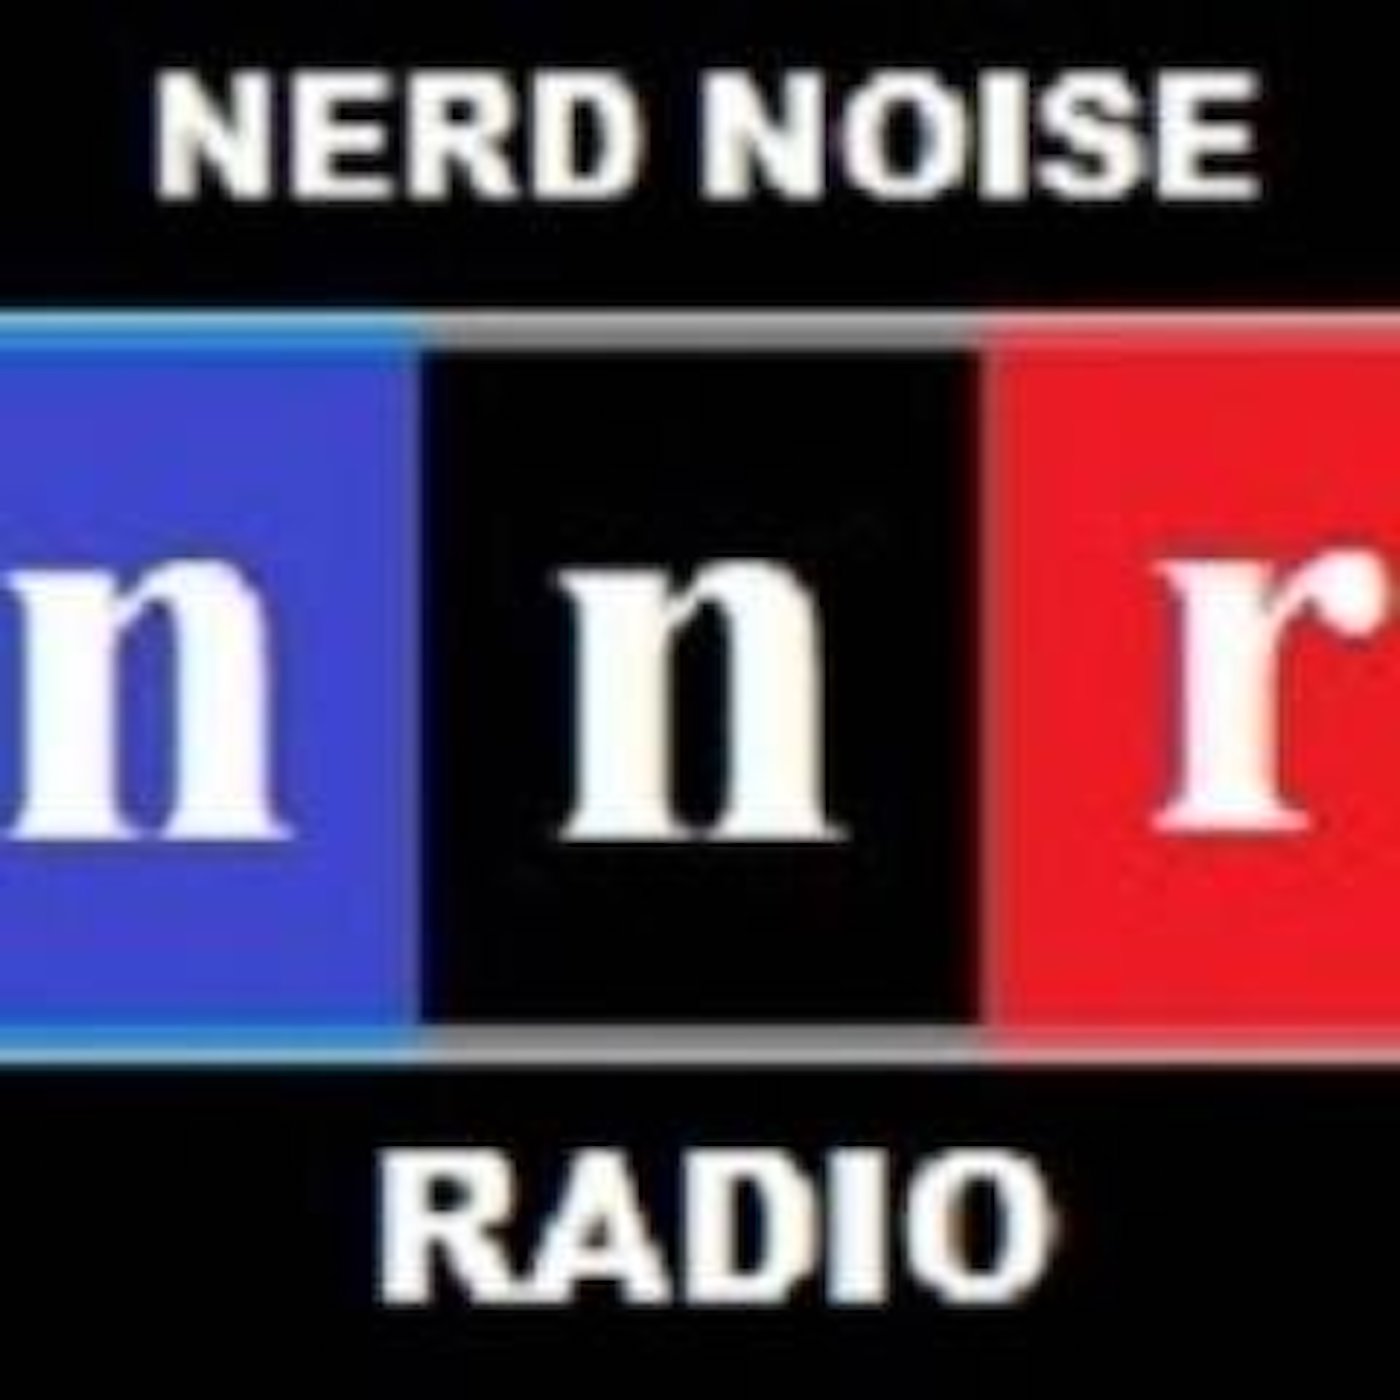 Nerd Noise Radio - Channel 1 Podcast - C1E9: - ”May the 4th be With You”